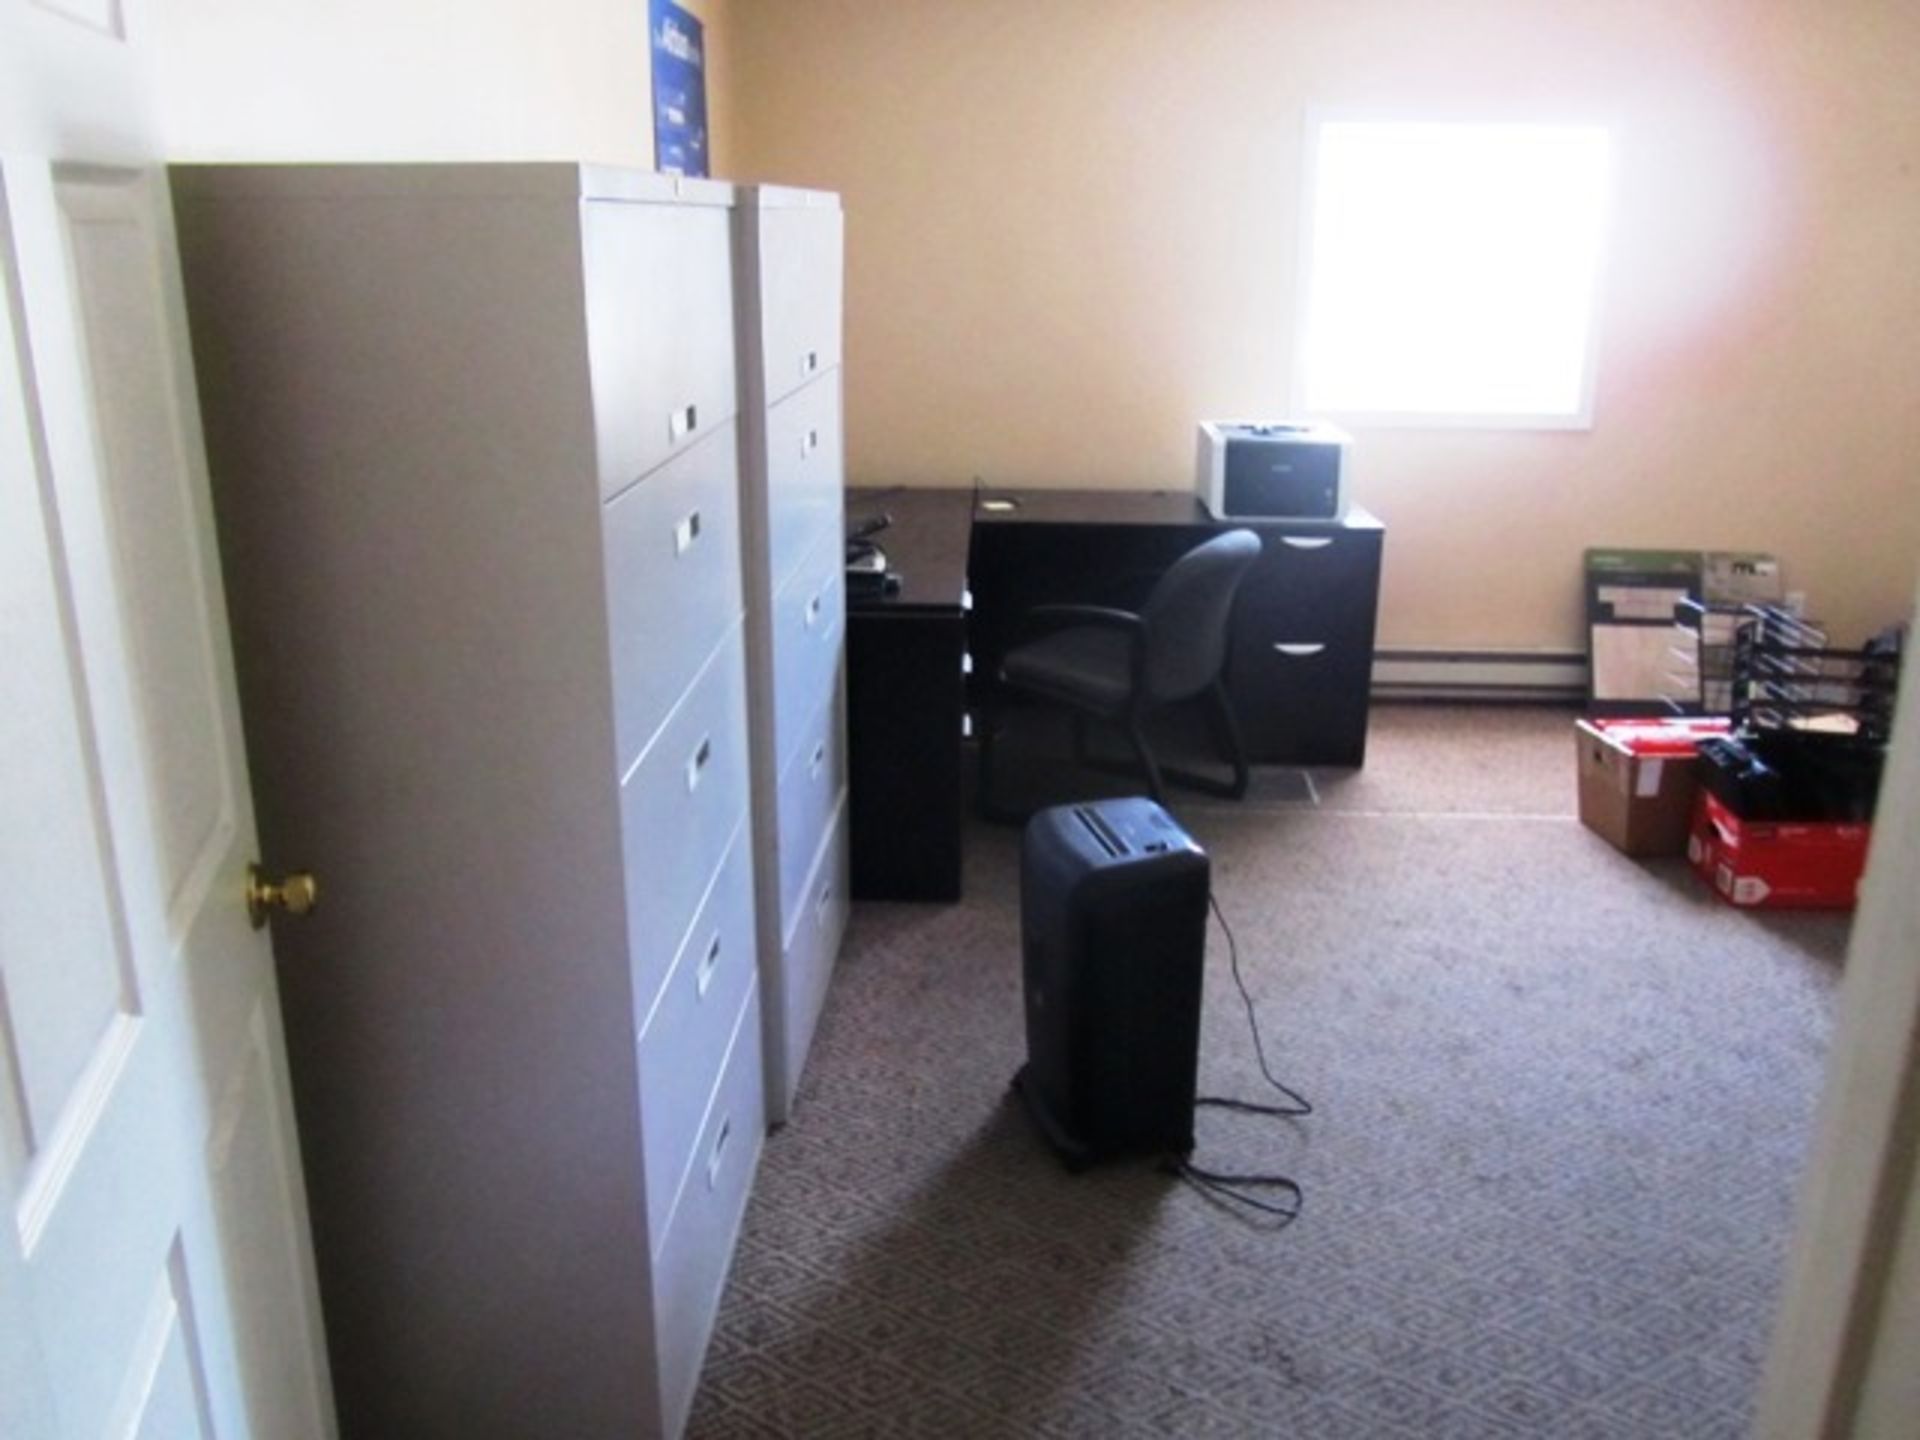 Contents of Room consisting of (2) Desks, Chairs, (3) 5 Drawer Lateral Cabinets